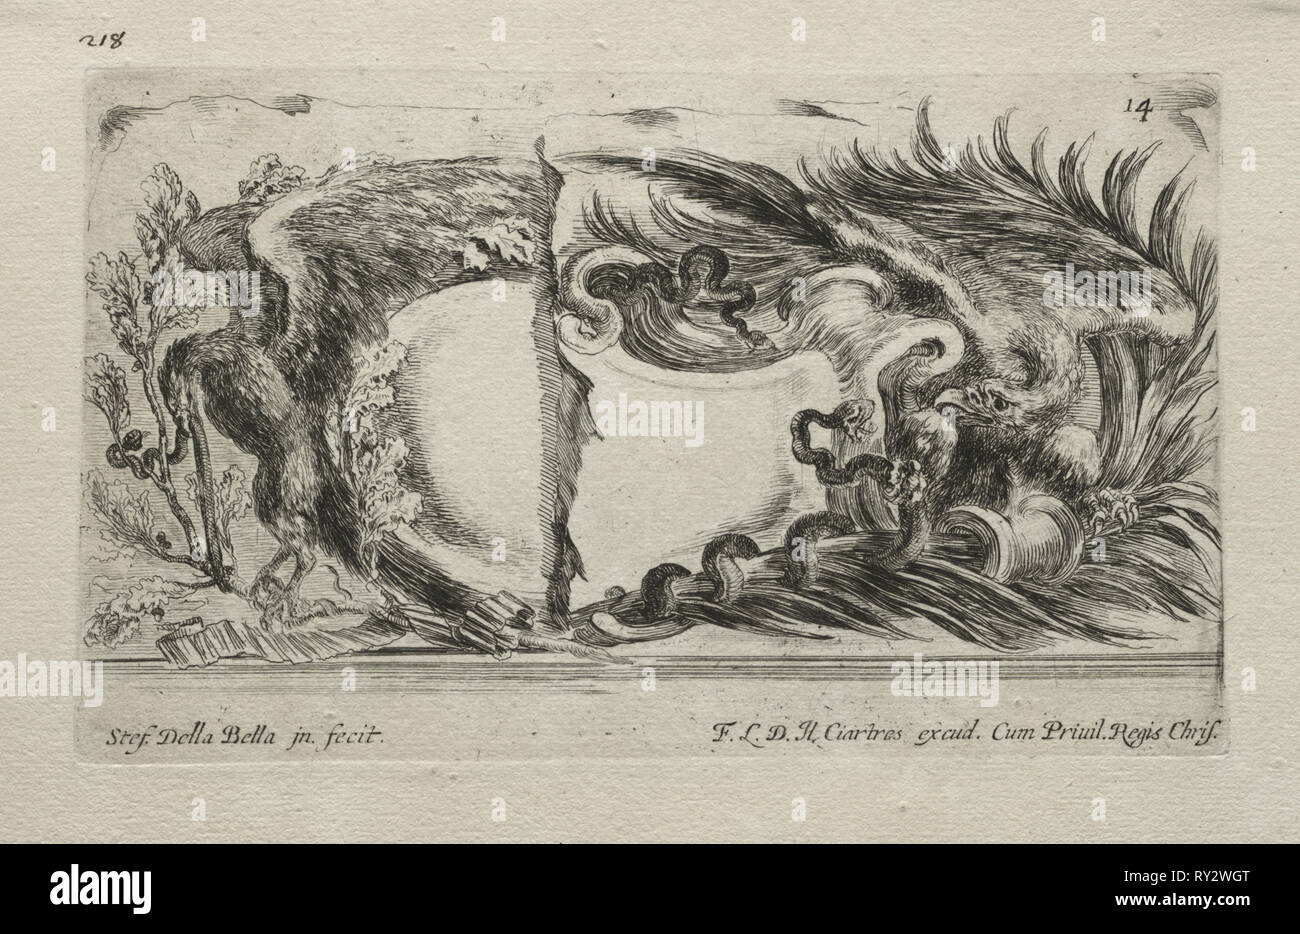 Collection of Various Caprices and New Designs of Cartouches and Ornaments:  No 14. Stefano Della Bella (Italian, 1610-1664). Etching Stock Photo